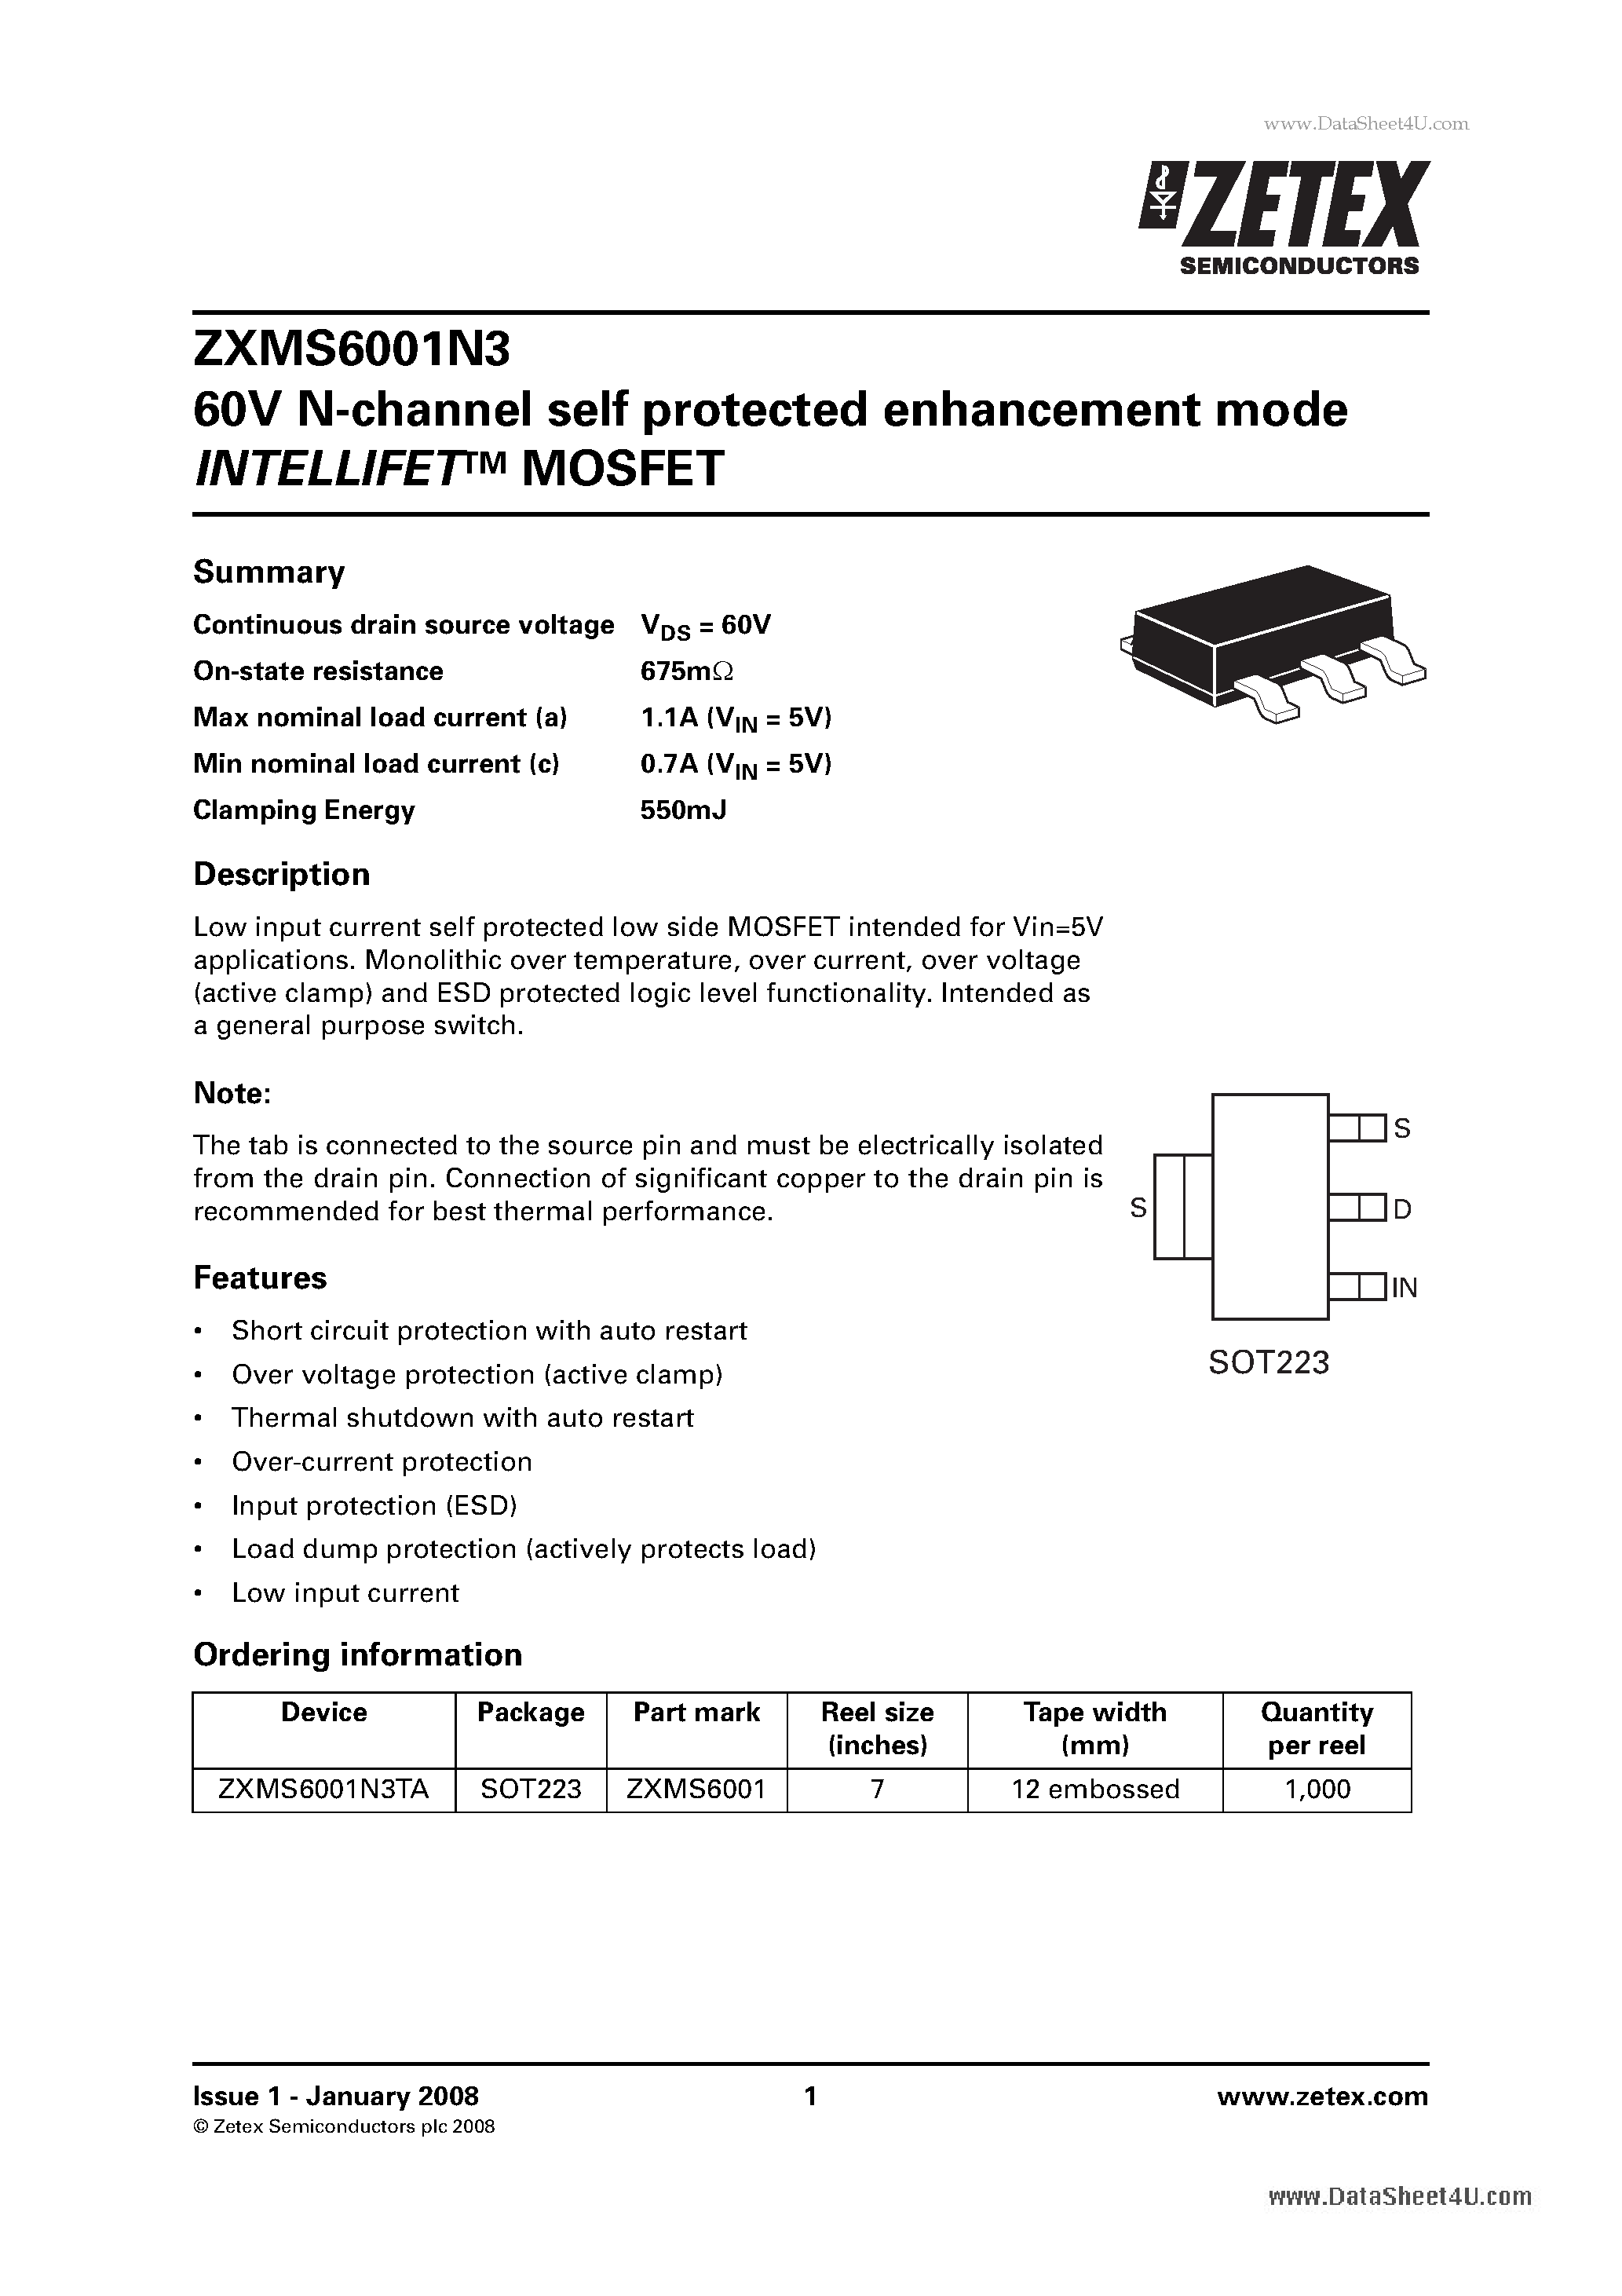 Datasheet ZXMS6001N3 - 60V N-channel self protected enhancement mode INTELLIFETTM MOSFET page 1